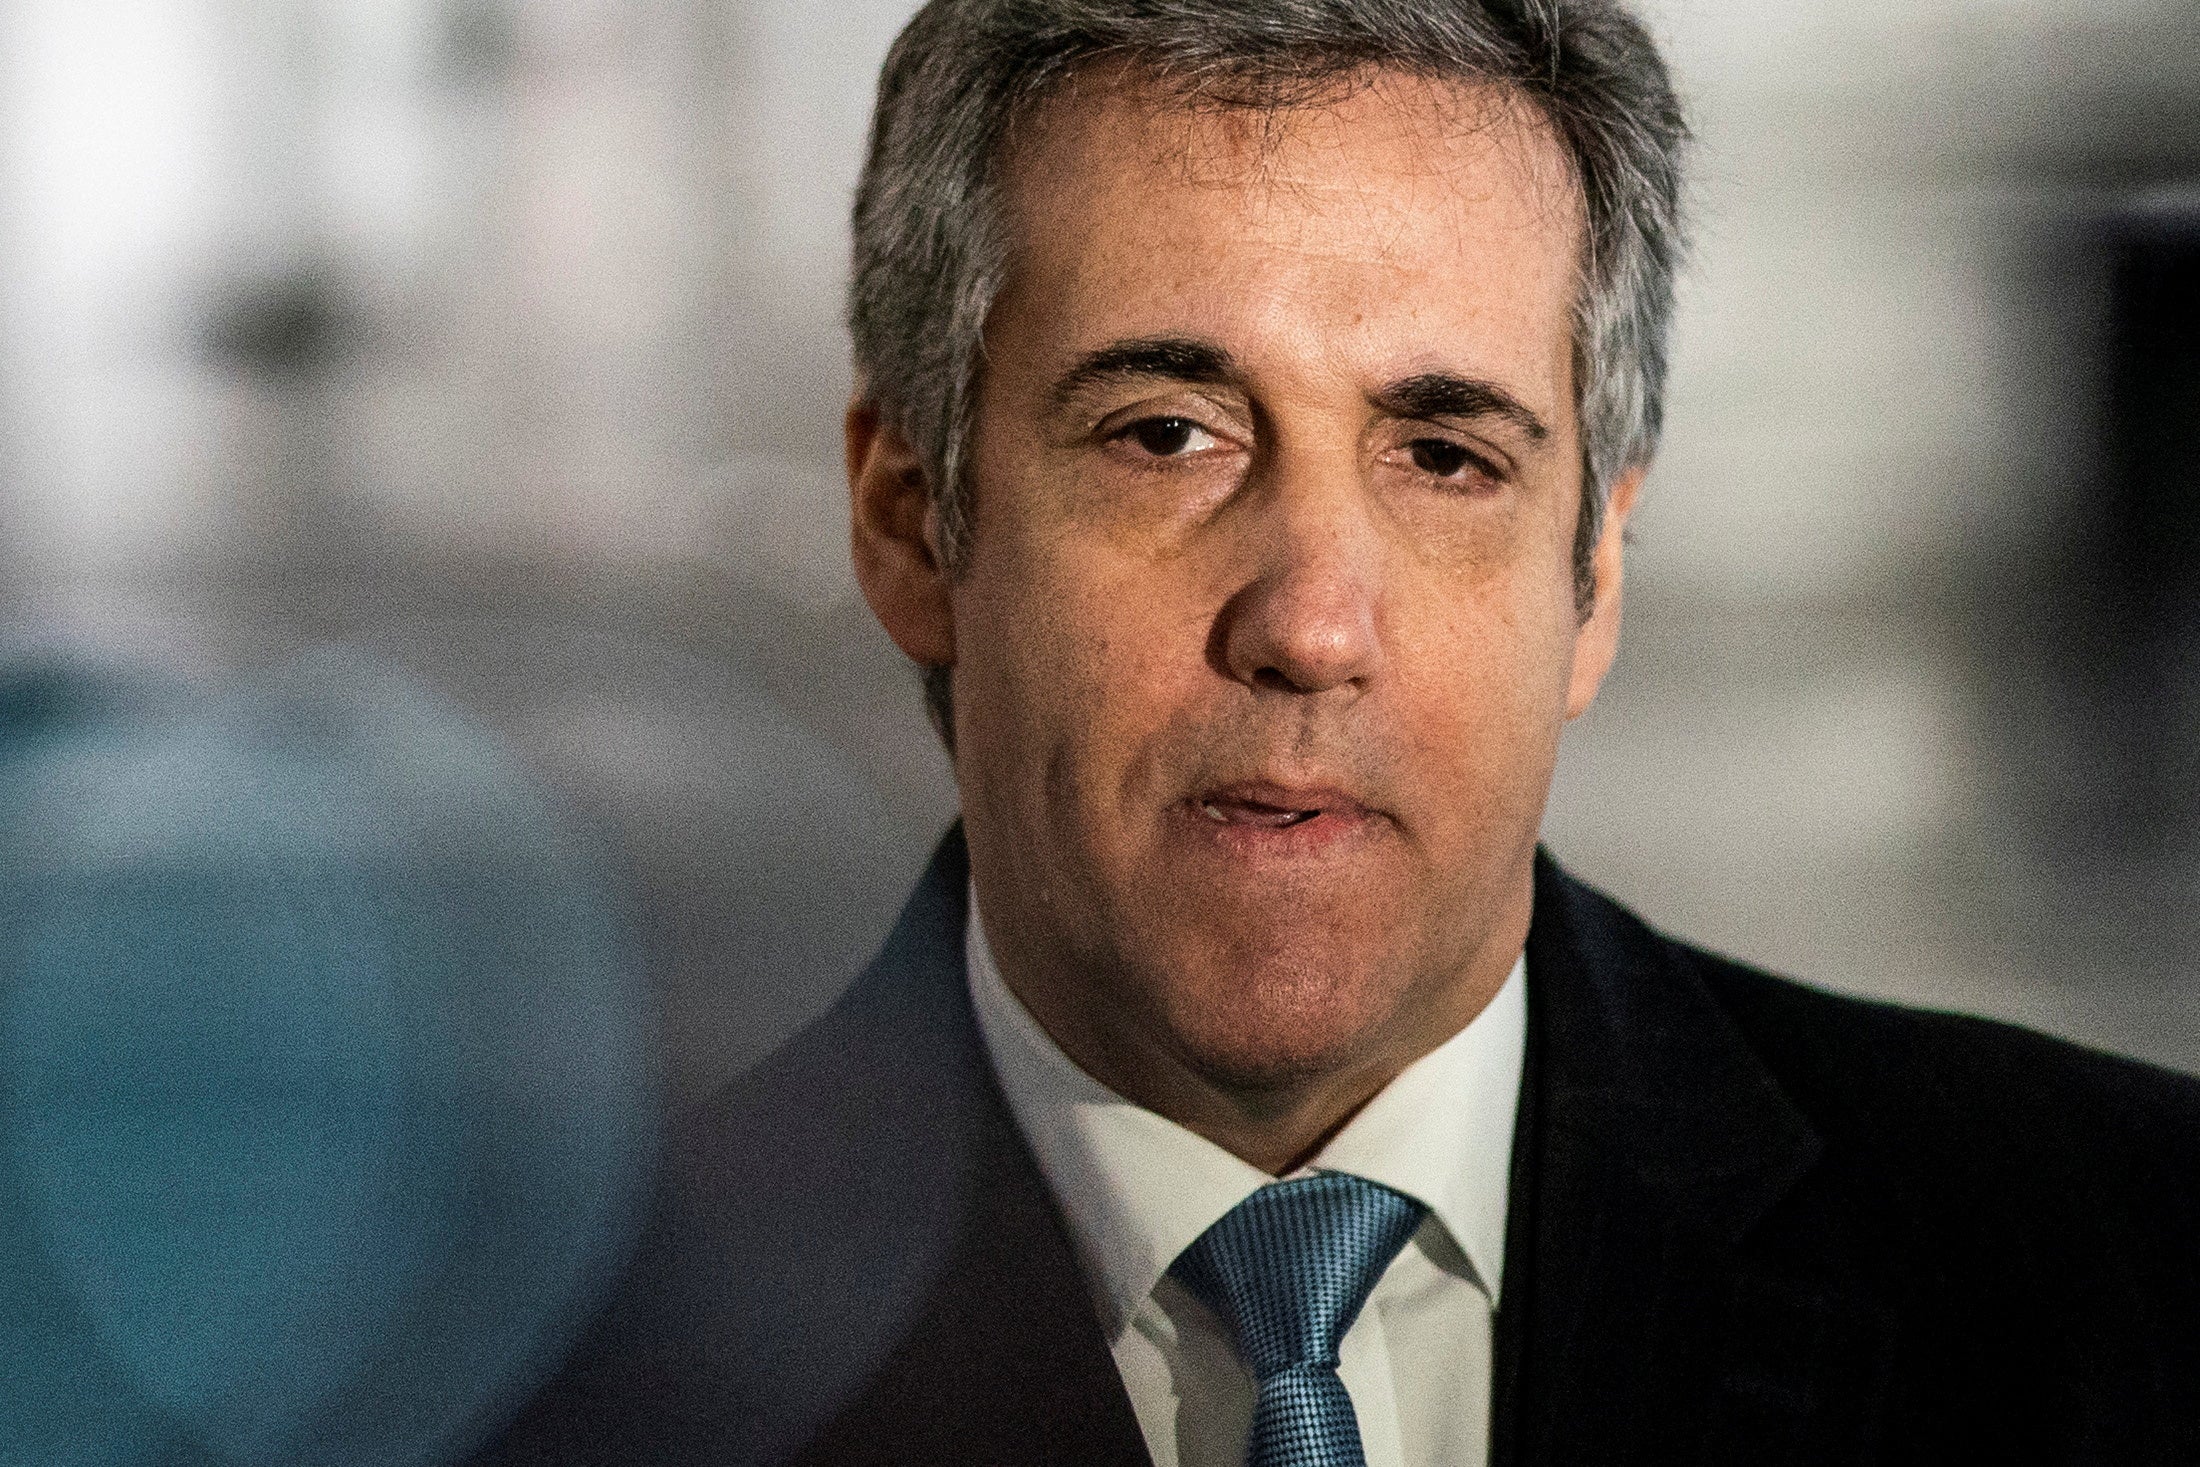 Michael Cohen, former attorney for Donald Trump, arrives at a courthouse in New York City on 13 March 2023